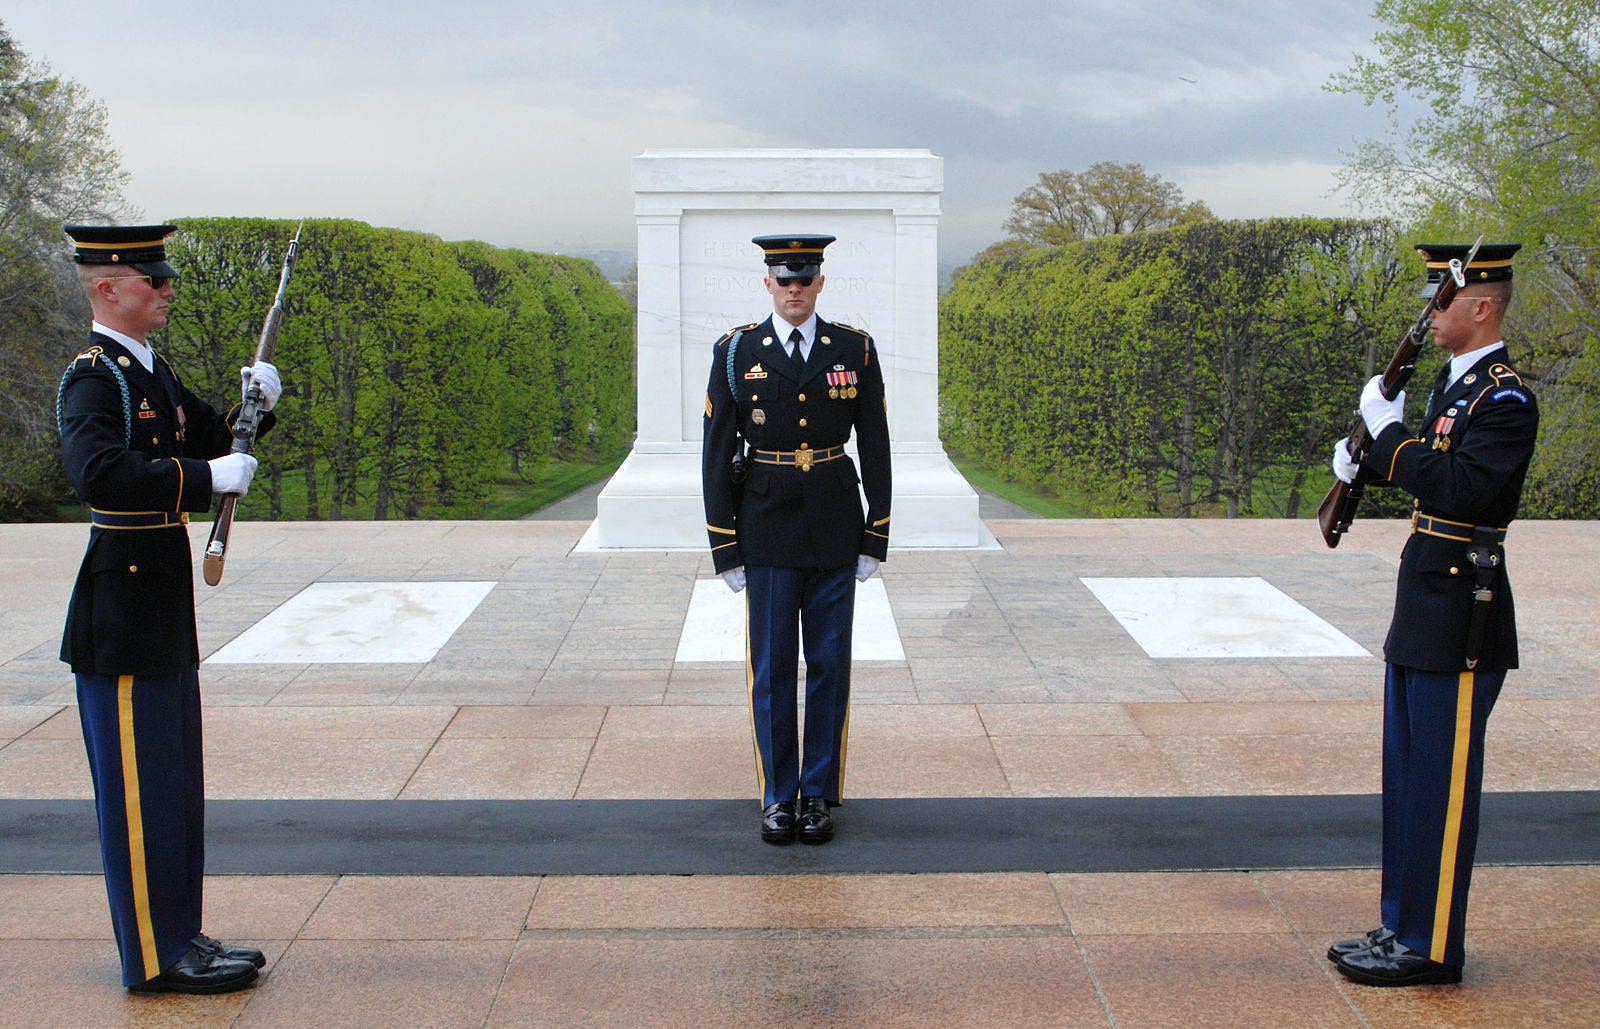 Sgt. Benton Thames, Sgt. Jeff Binek and Spc. William Johnson change the guard at the Tomb of the Unknowns. The ceremony is full of tradition and meaning. For example, sentinels take 21 steps or stand for 21 seconds—honoring the unknowns with a version of the 21-gun salute. Wikimedia Commons.